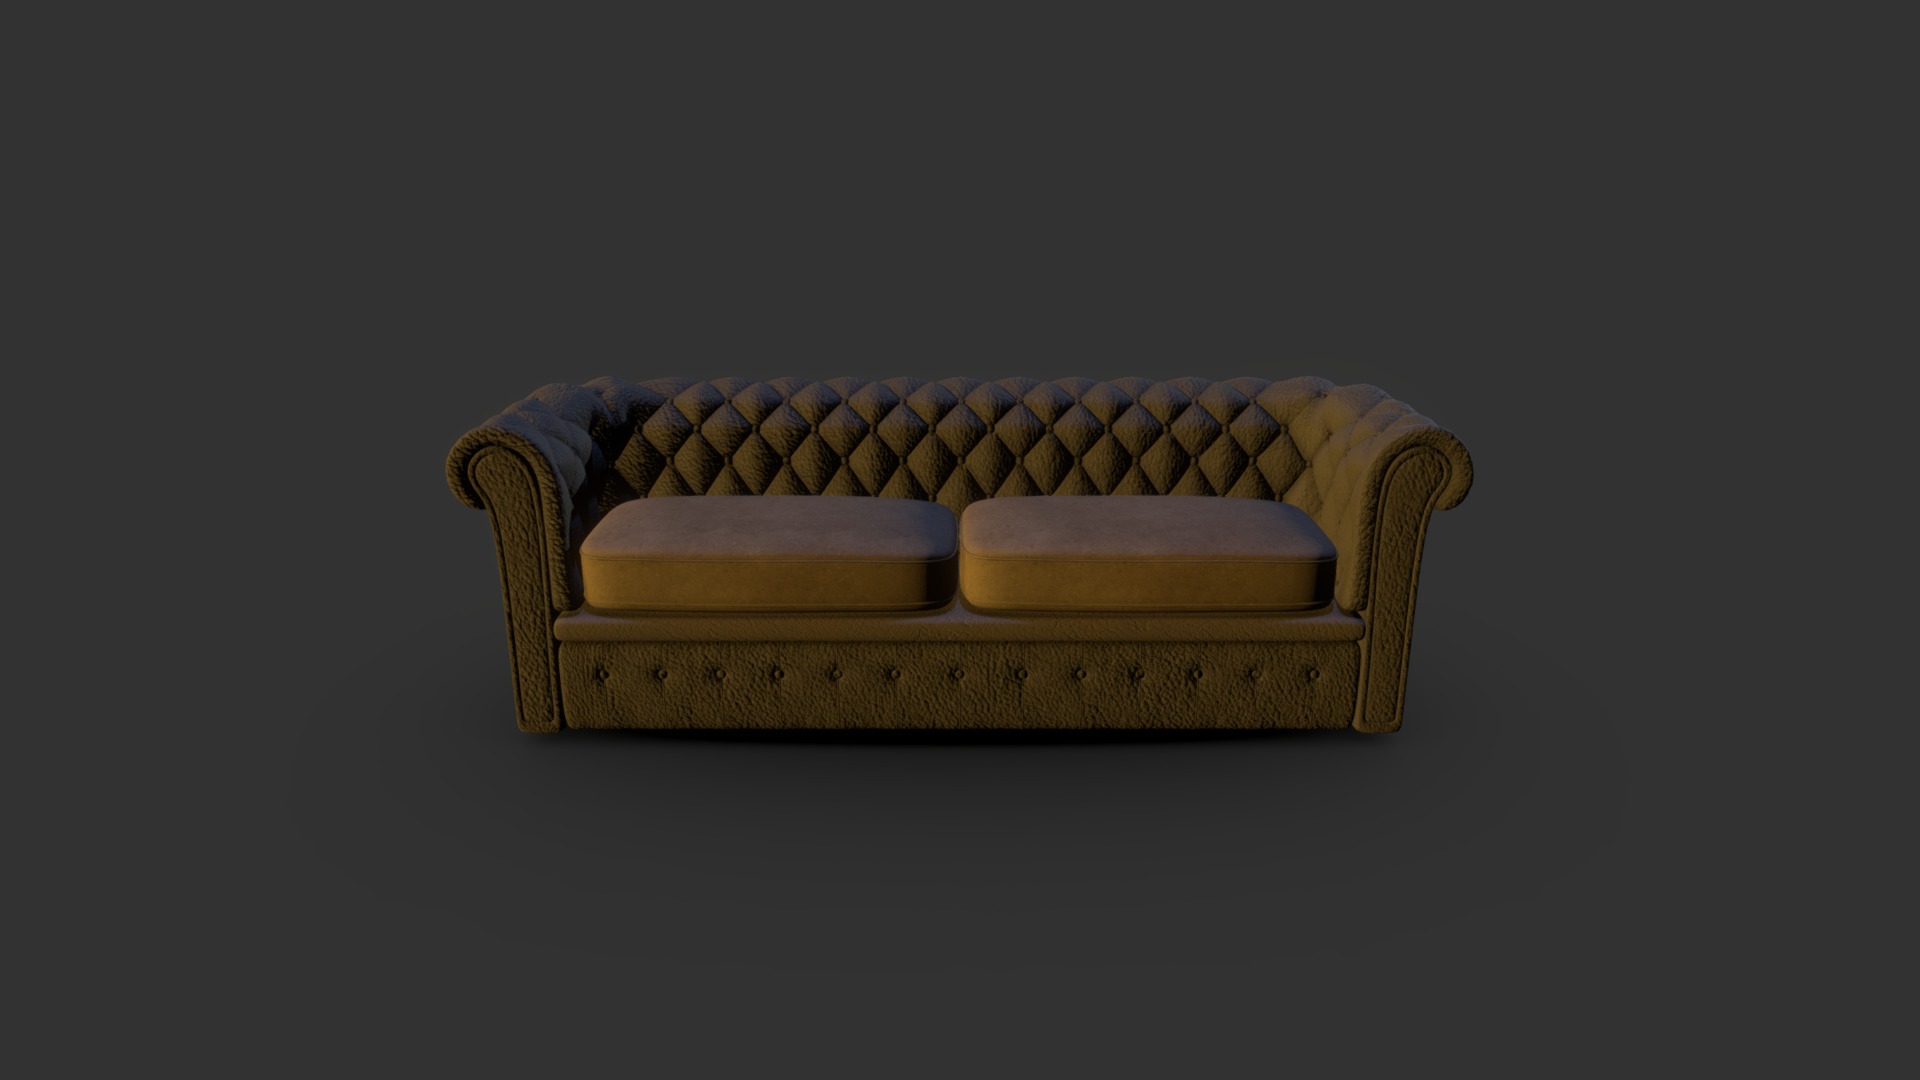 3D model Sofa using Blender - This is a 3D model of the Sofa using Blender. The 3D model is about a couch with a cushion.